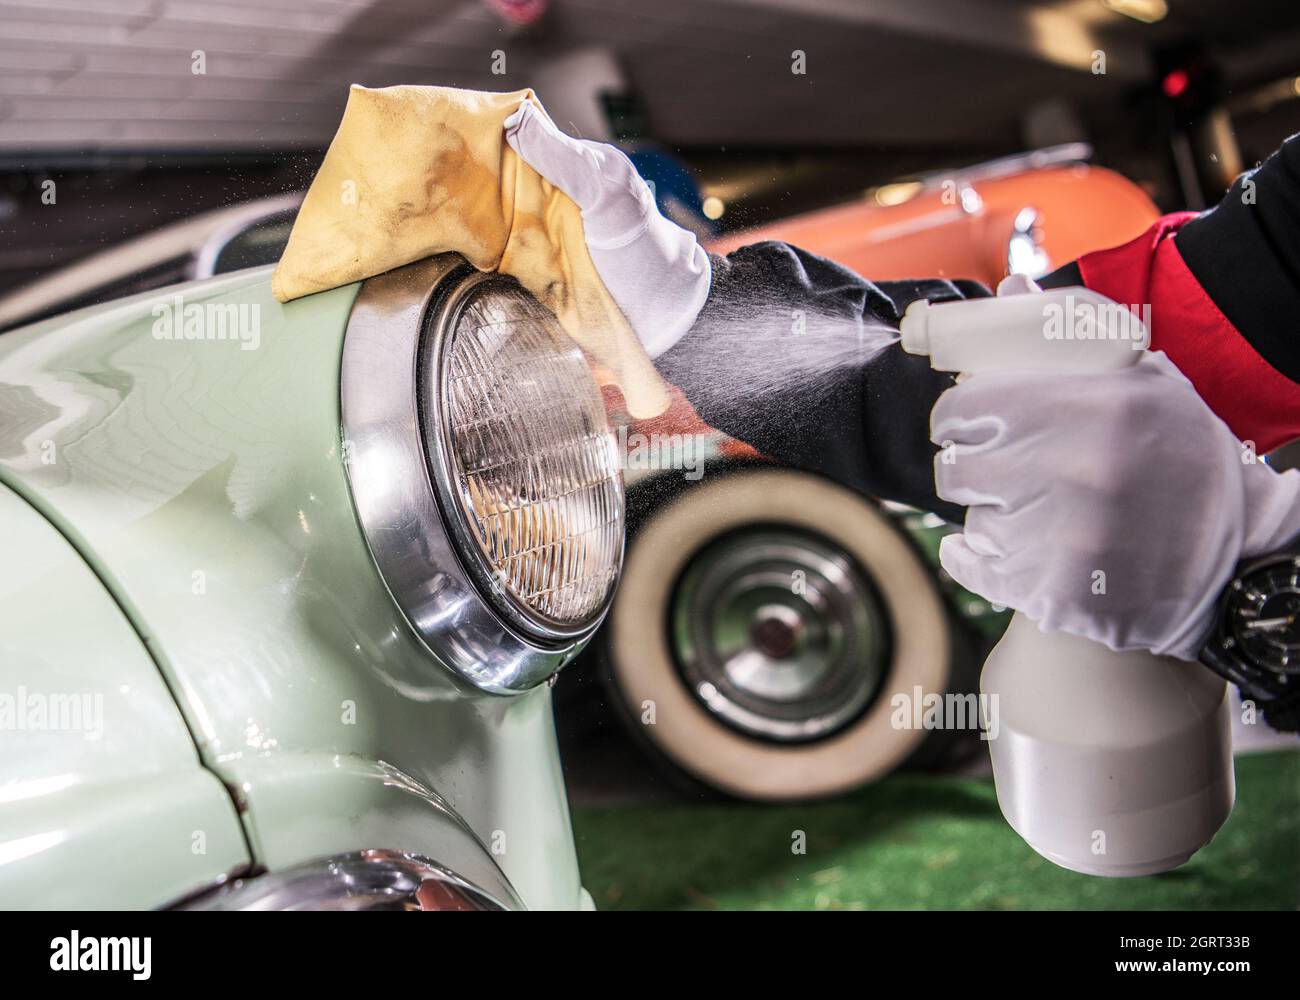 Cropped Image Of Worker Cleaning Headlight Of Car Stock Photo